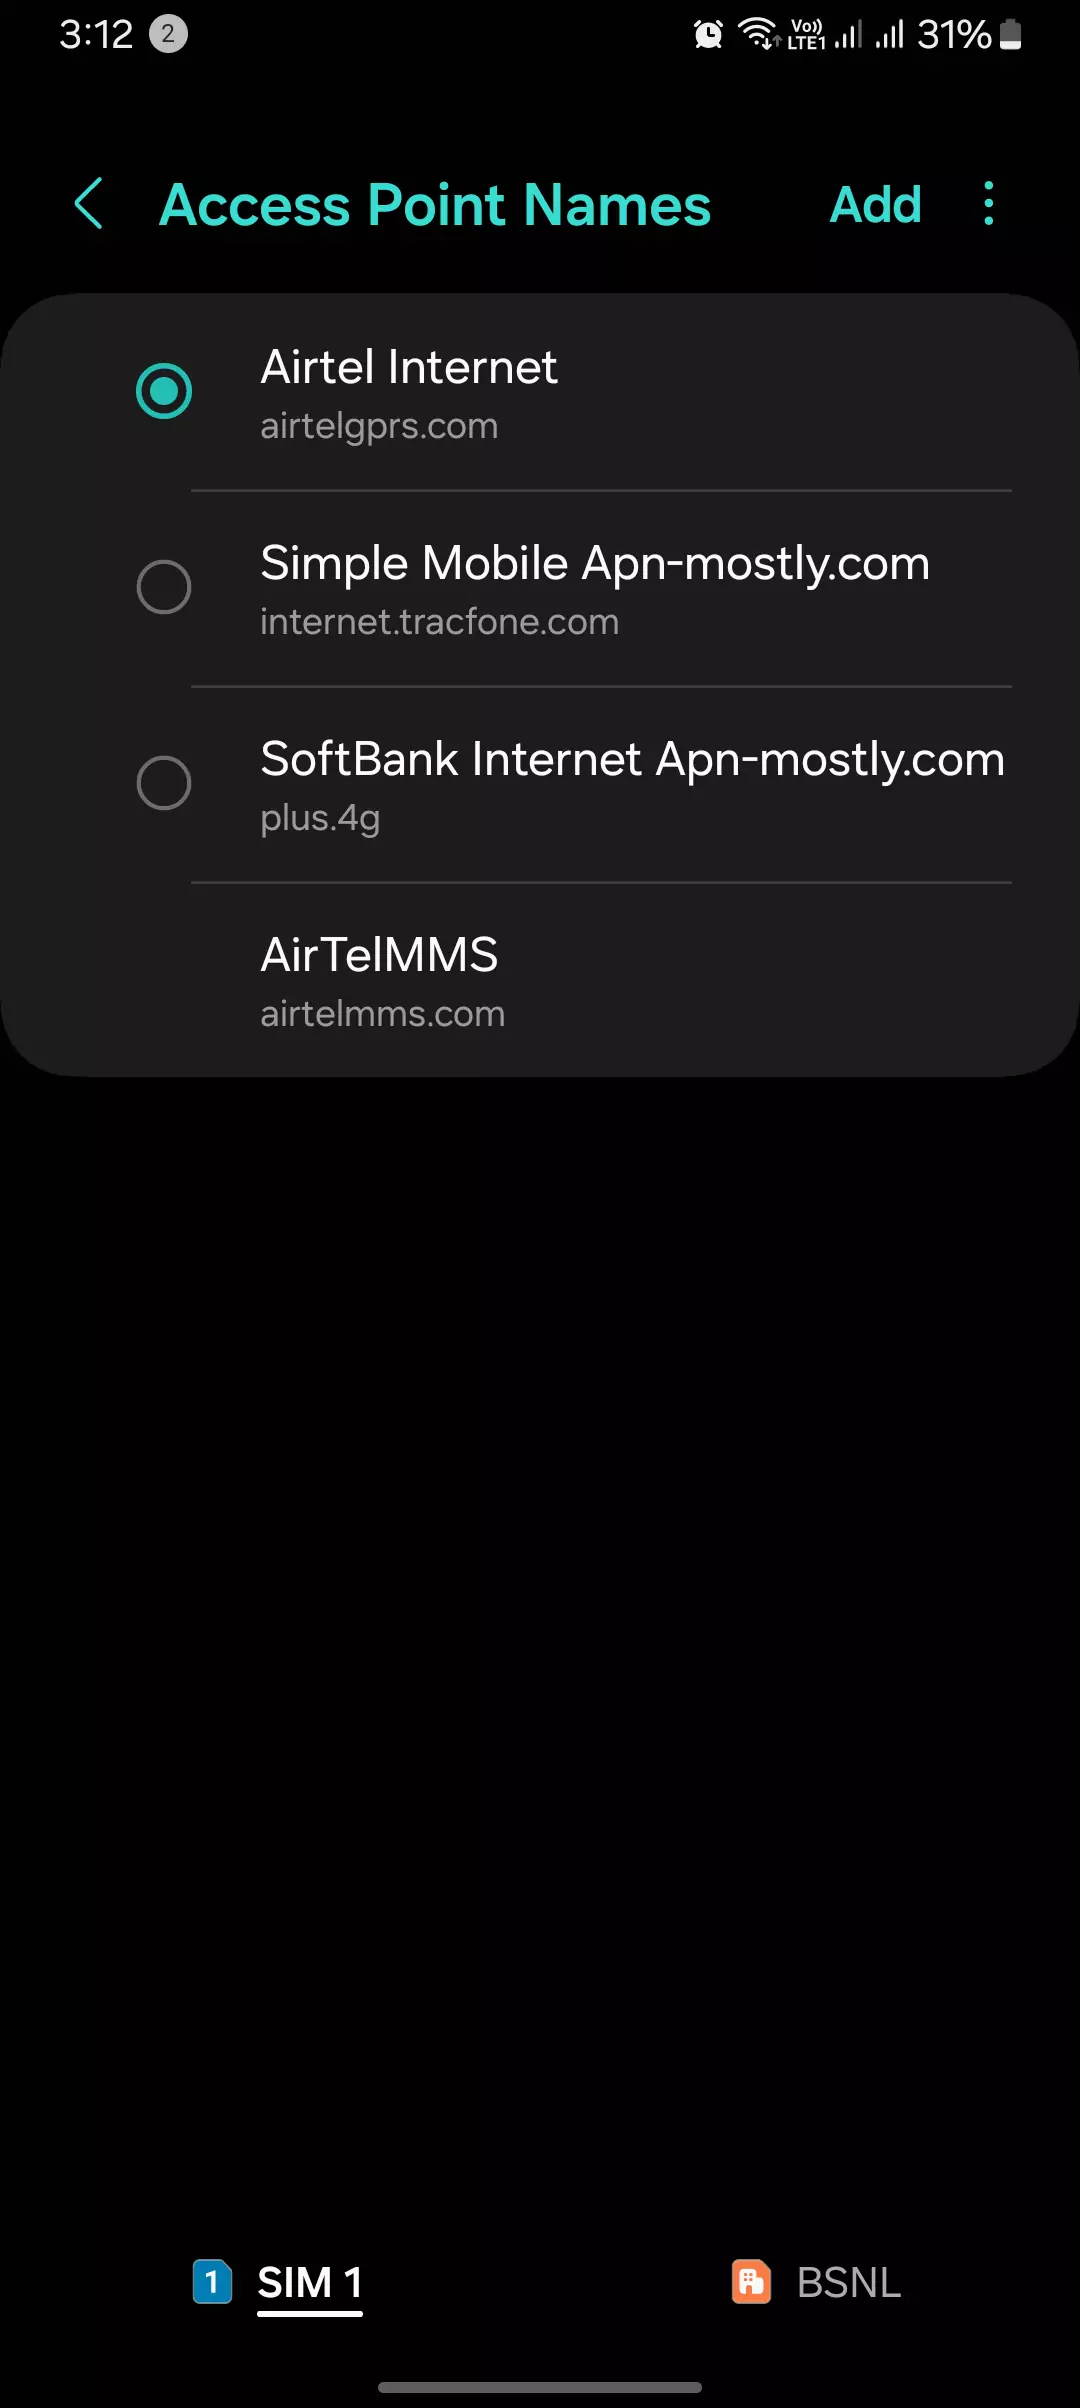 multiple apn settings in the access point names from android